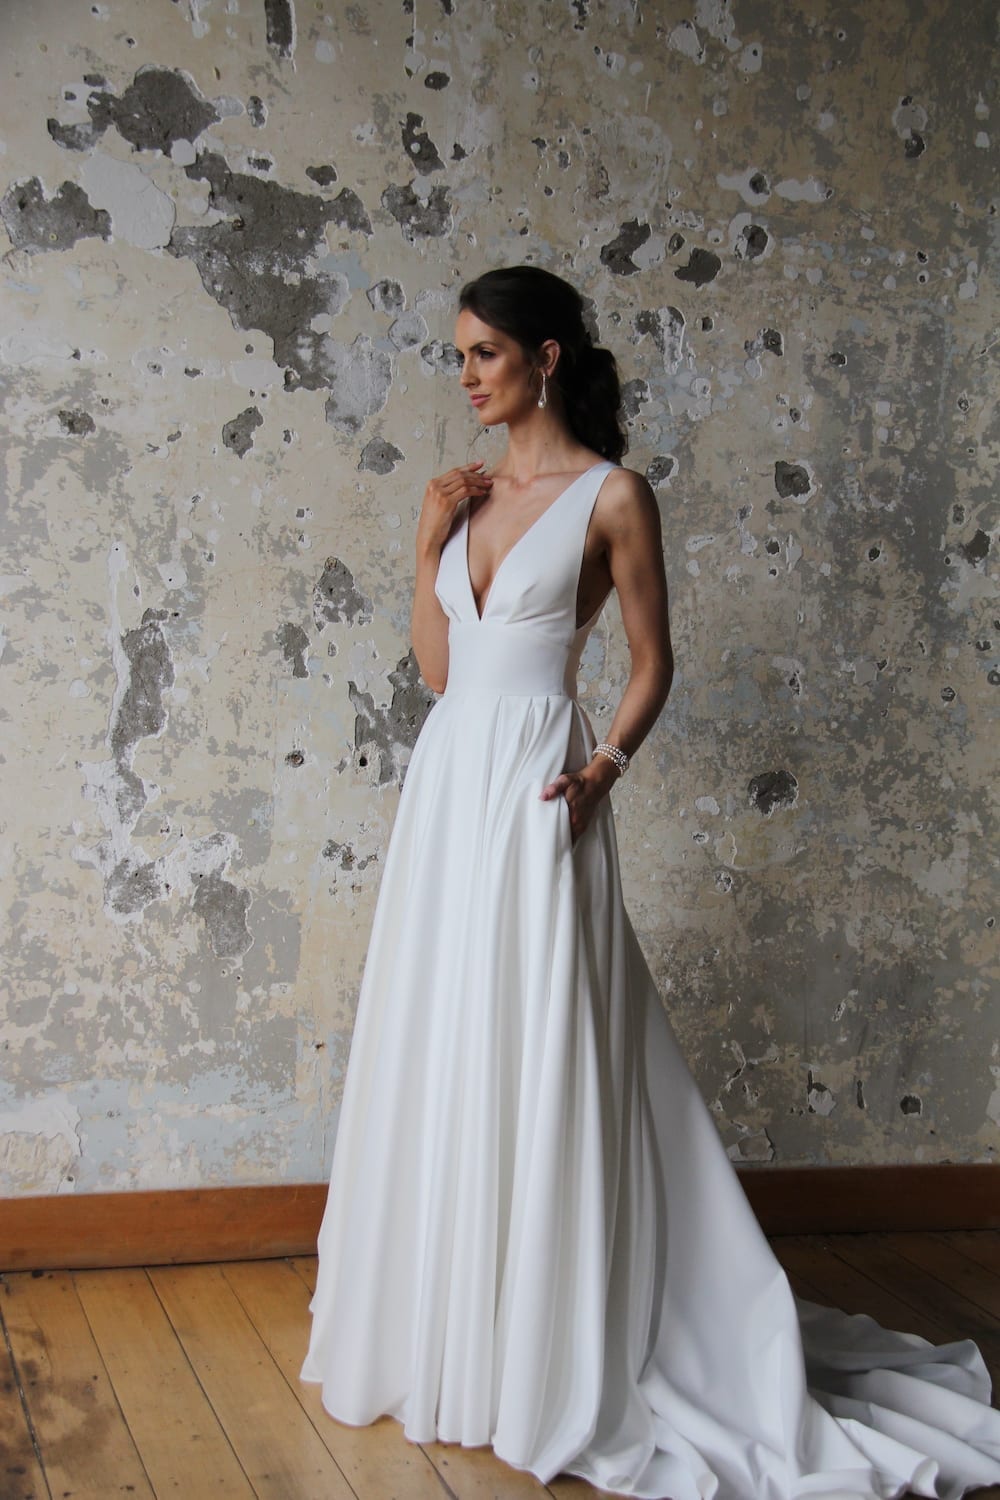 Female model wearing Vinka Design Modern Muse Wedding Dress. In chic warehouse the front detail of a gown with plunging v-neckline, Clean, sharp lines and skirt with deep pleated folds and pockets.